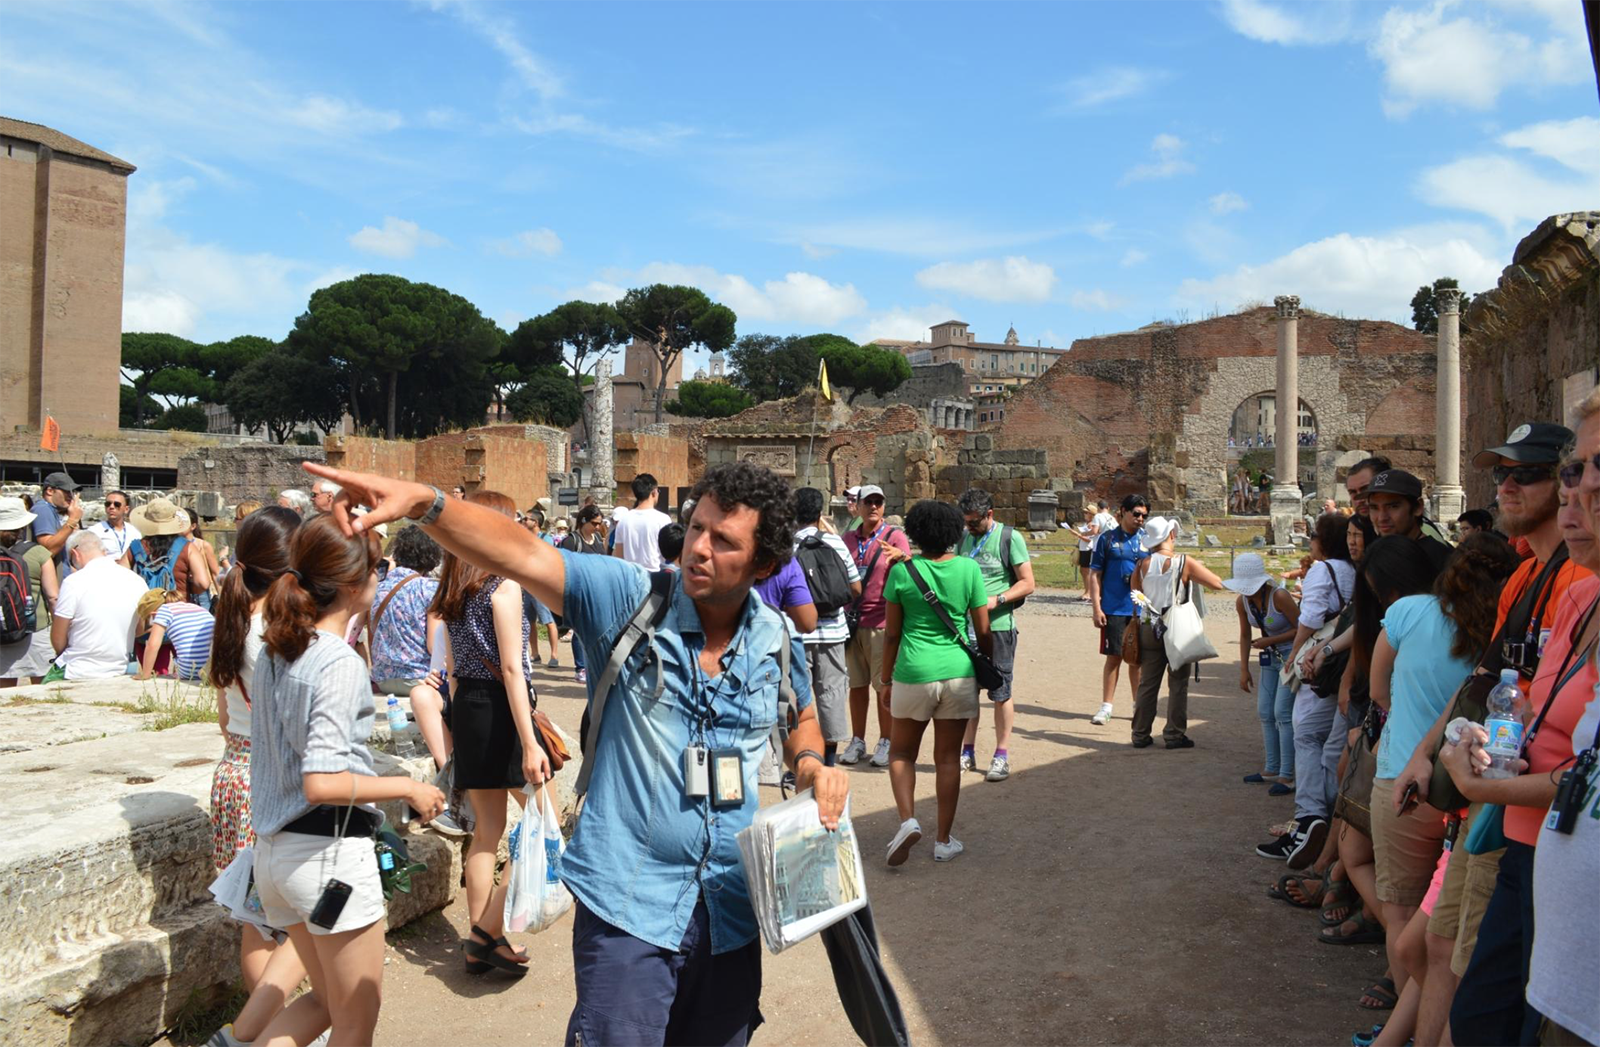 Tour guide Ferdinando with a group on the Colosseum Arena